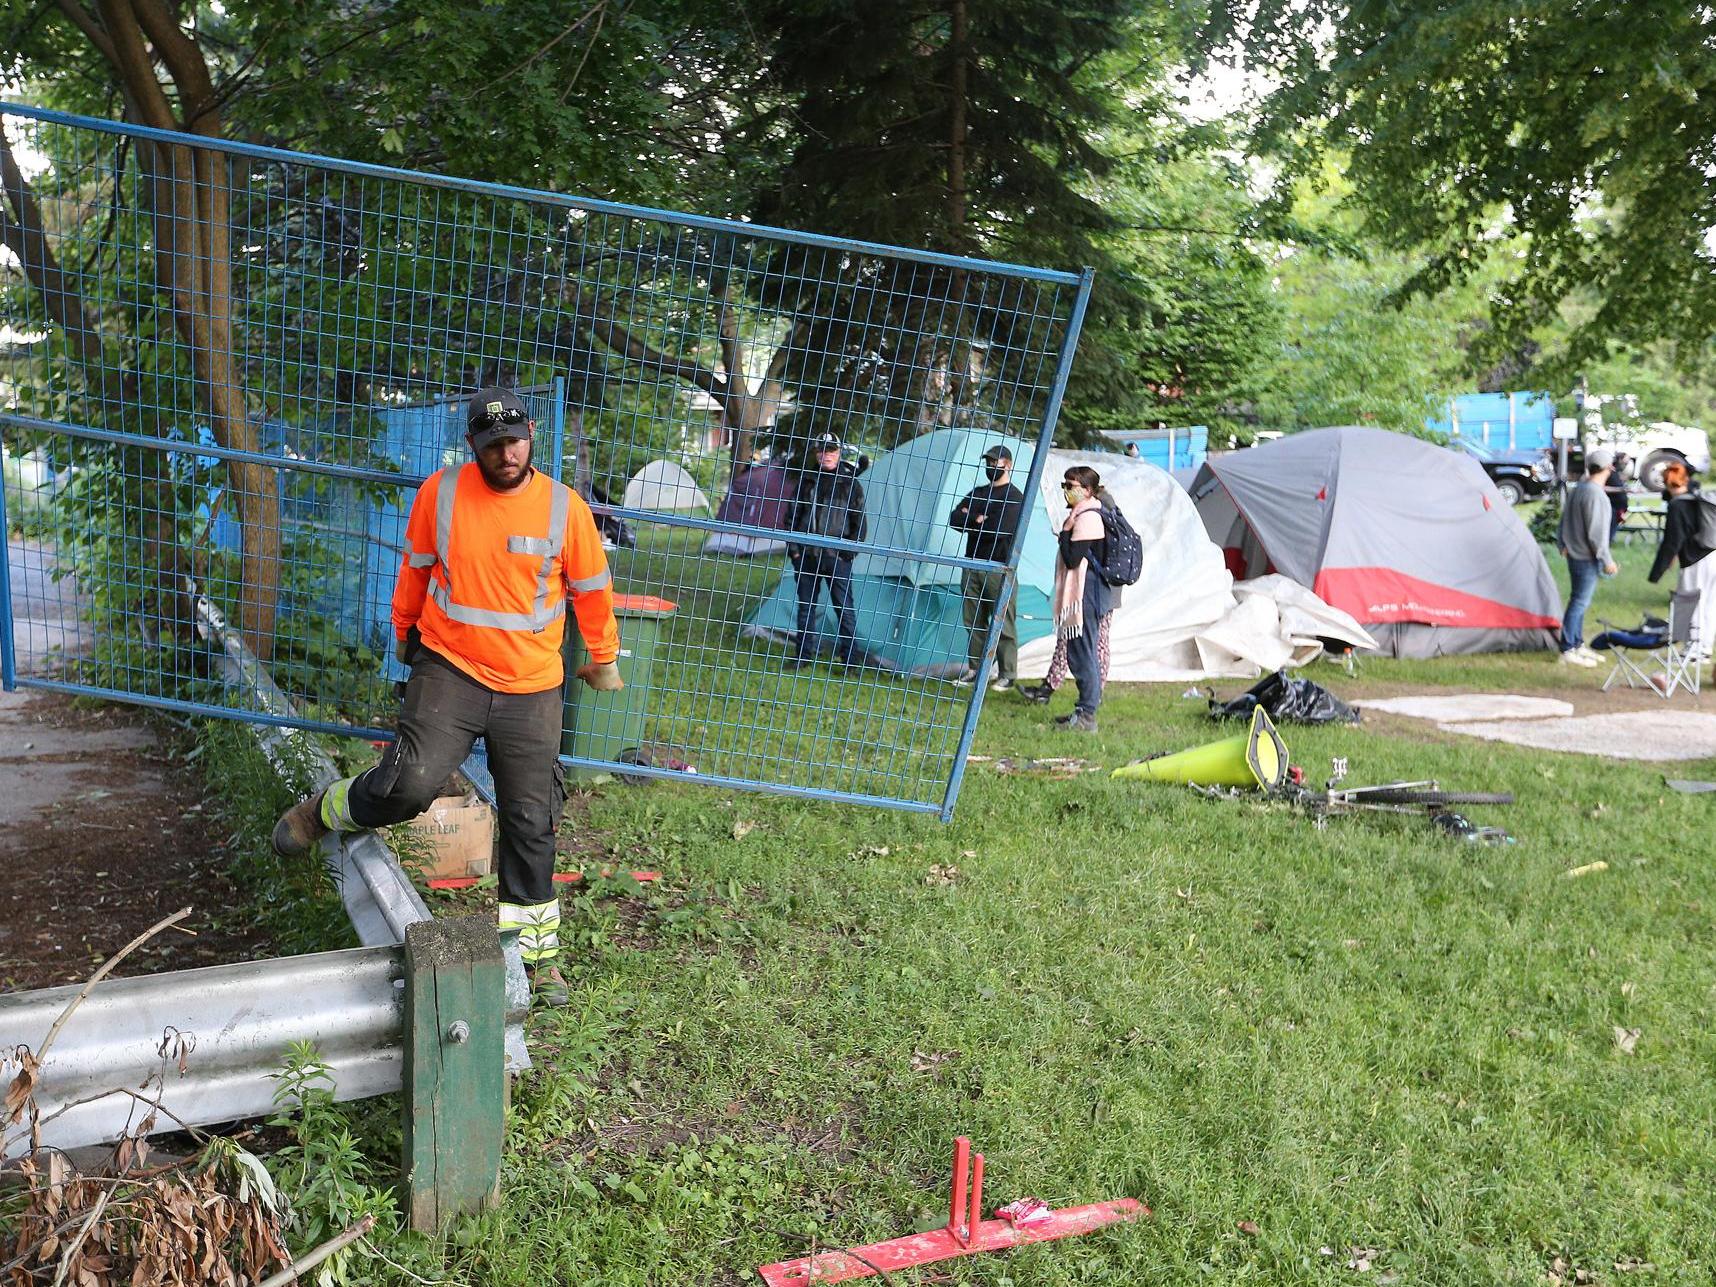 A city employee at a homeless encampment in Toronto